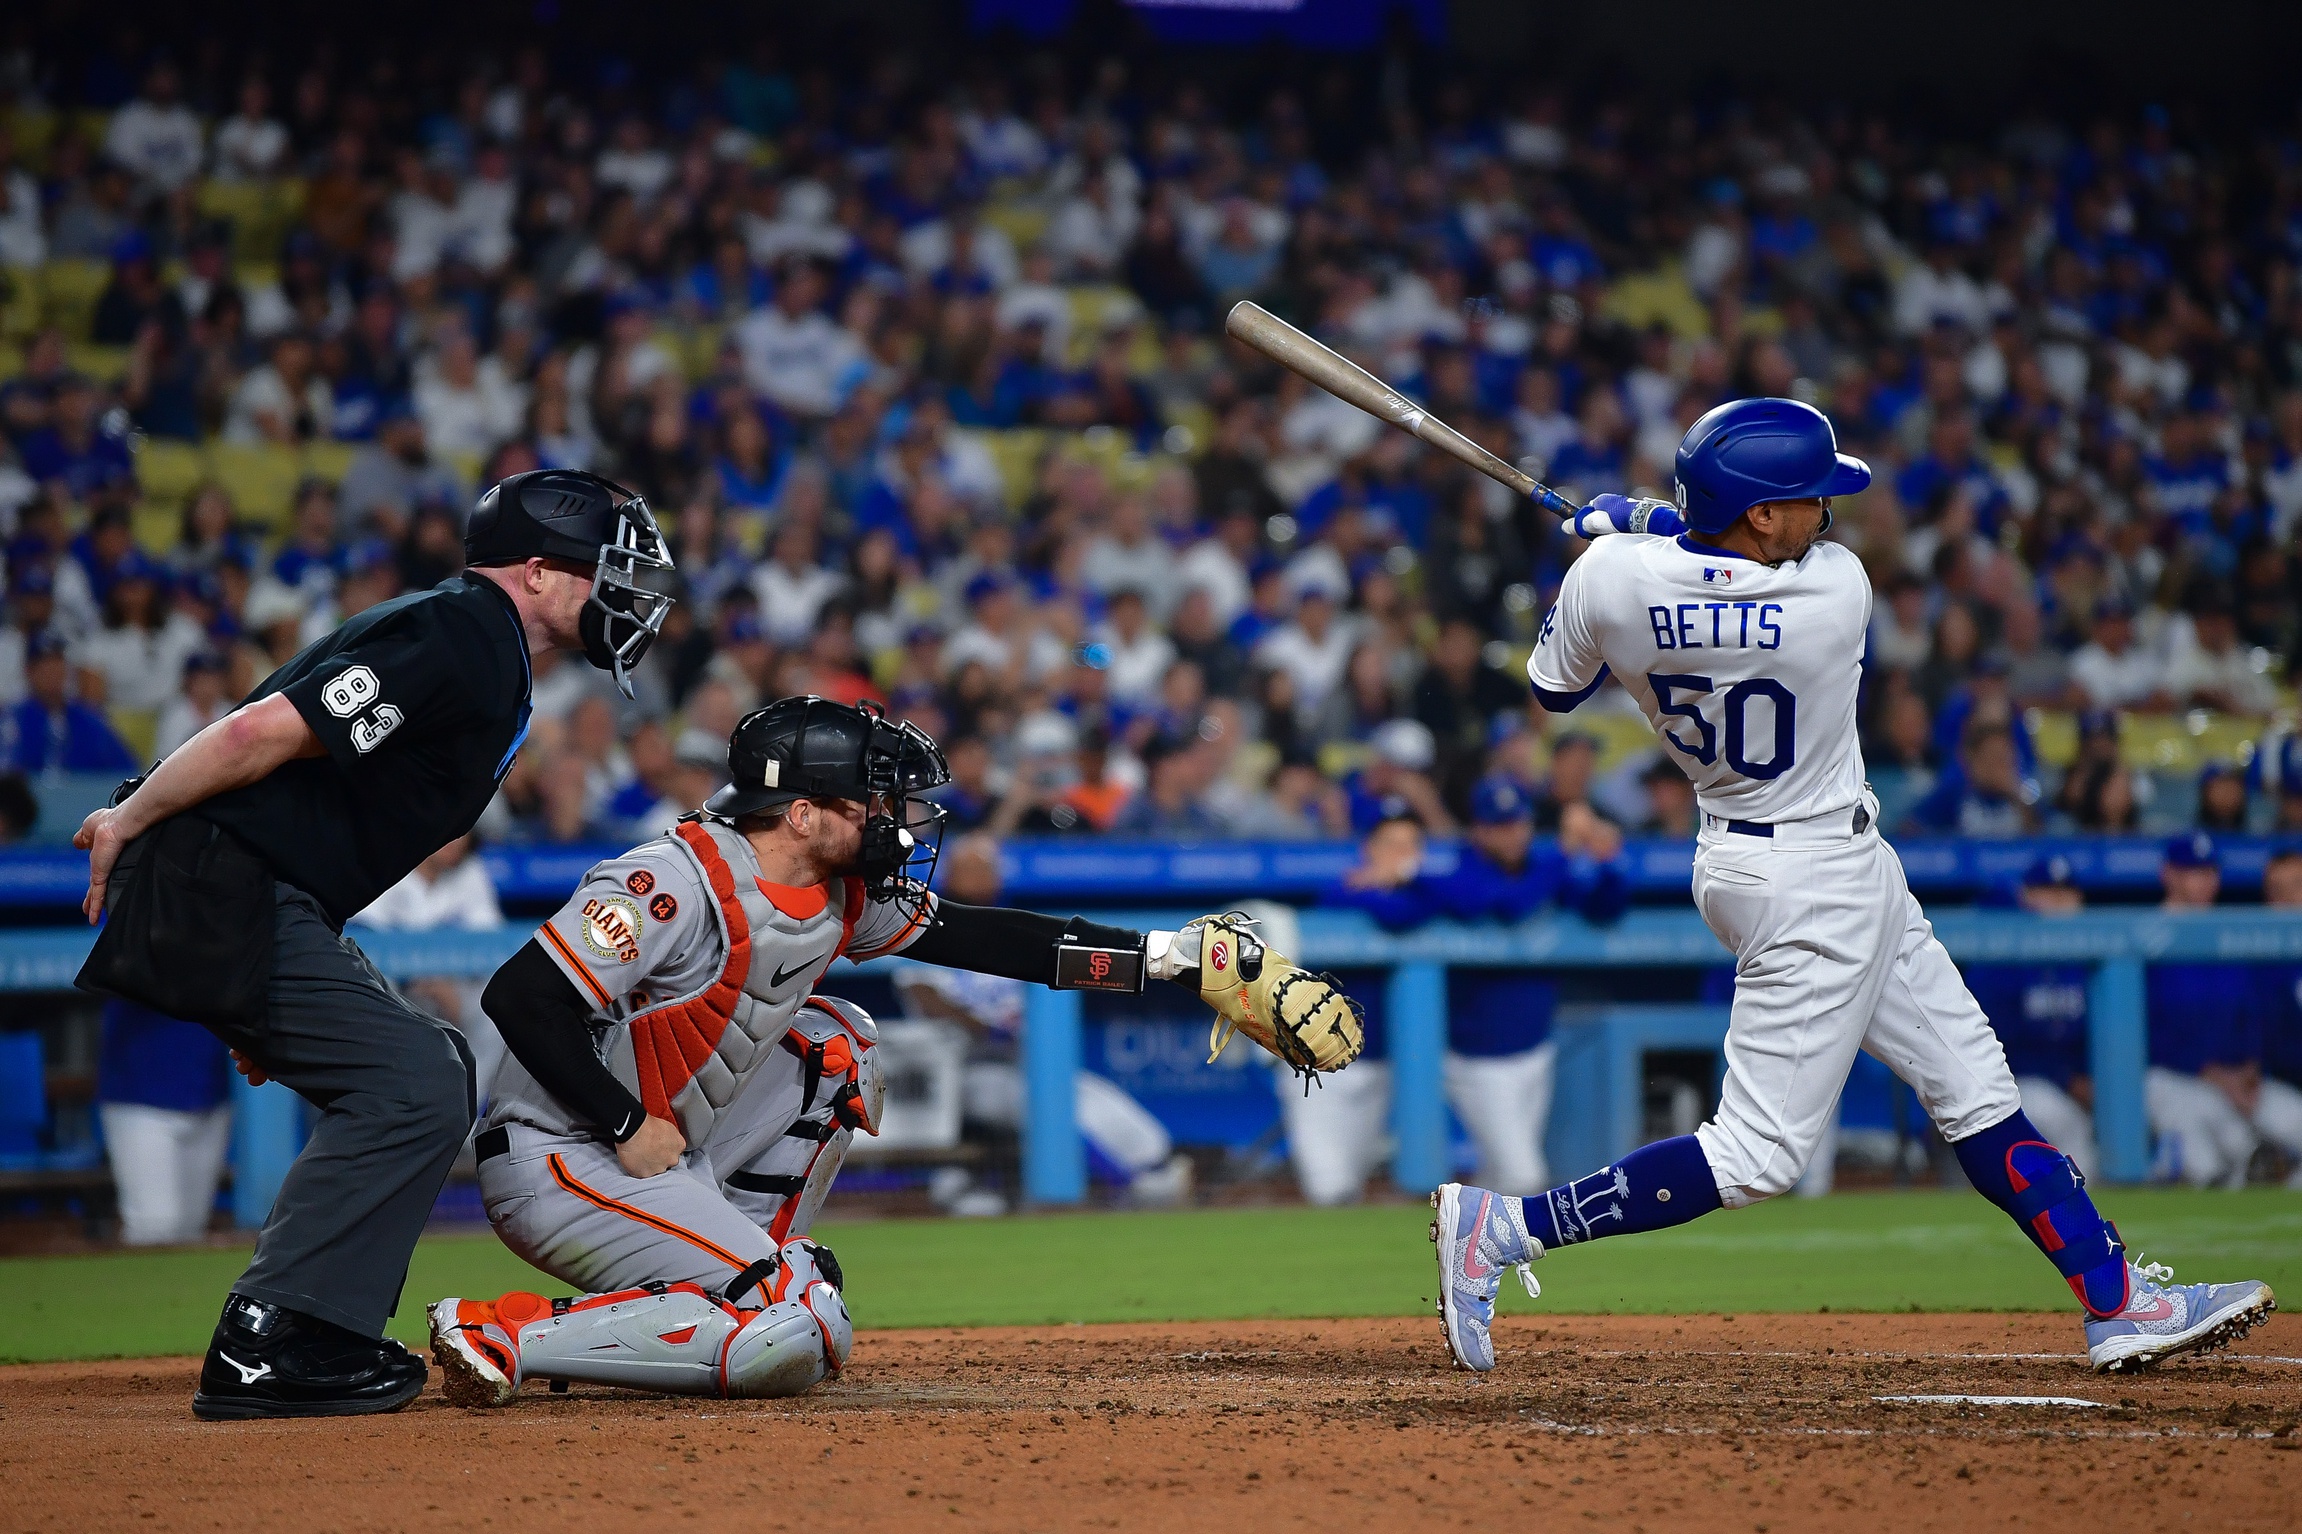 How the Dodgers Stack Up Entering the 2023 MLB Postseason - New